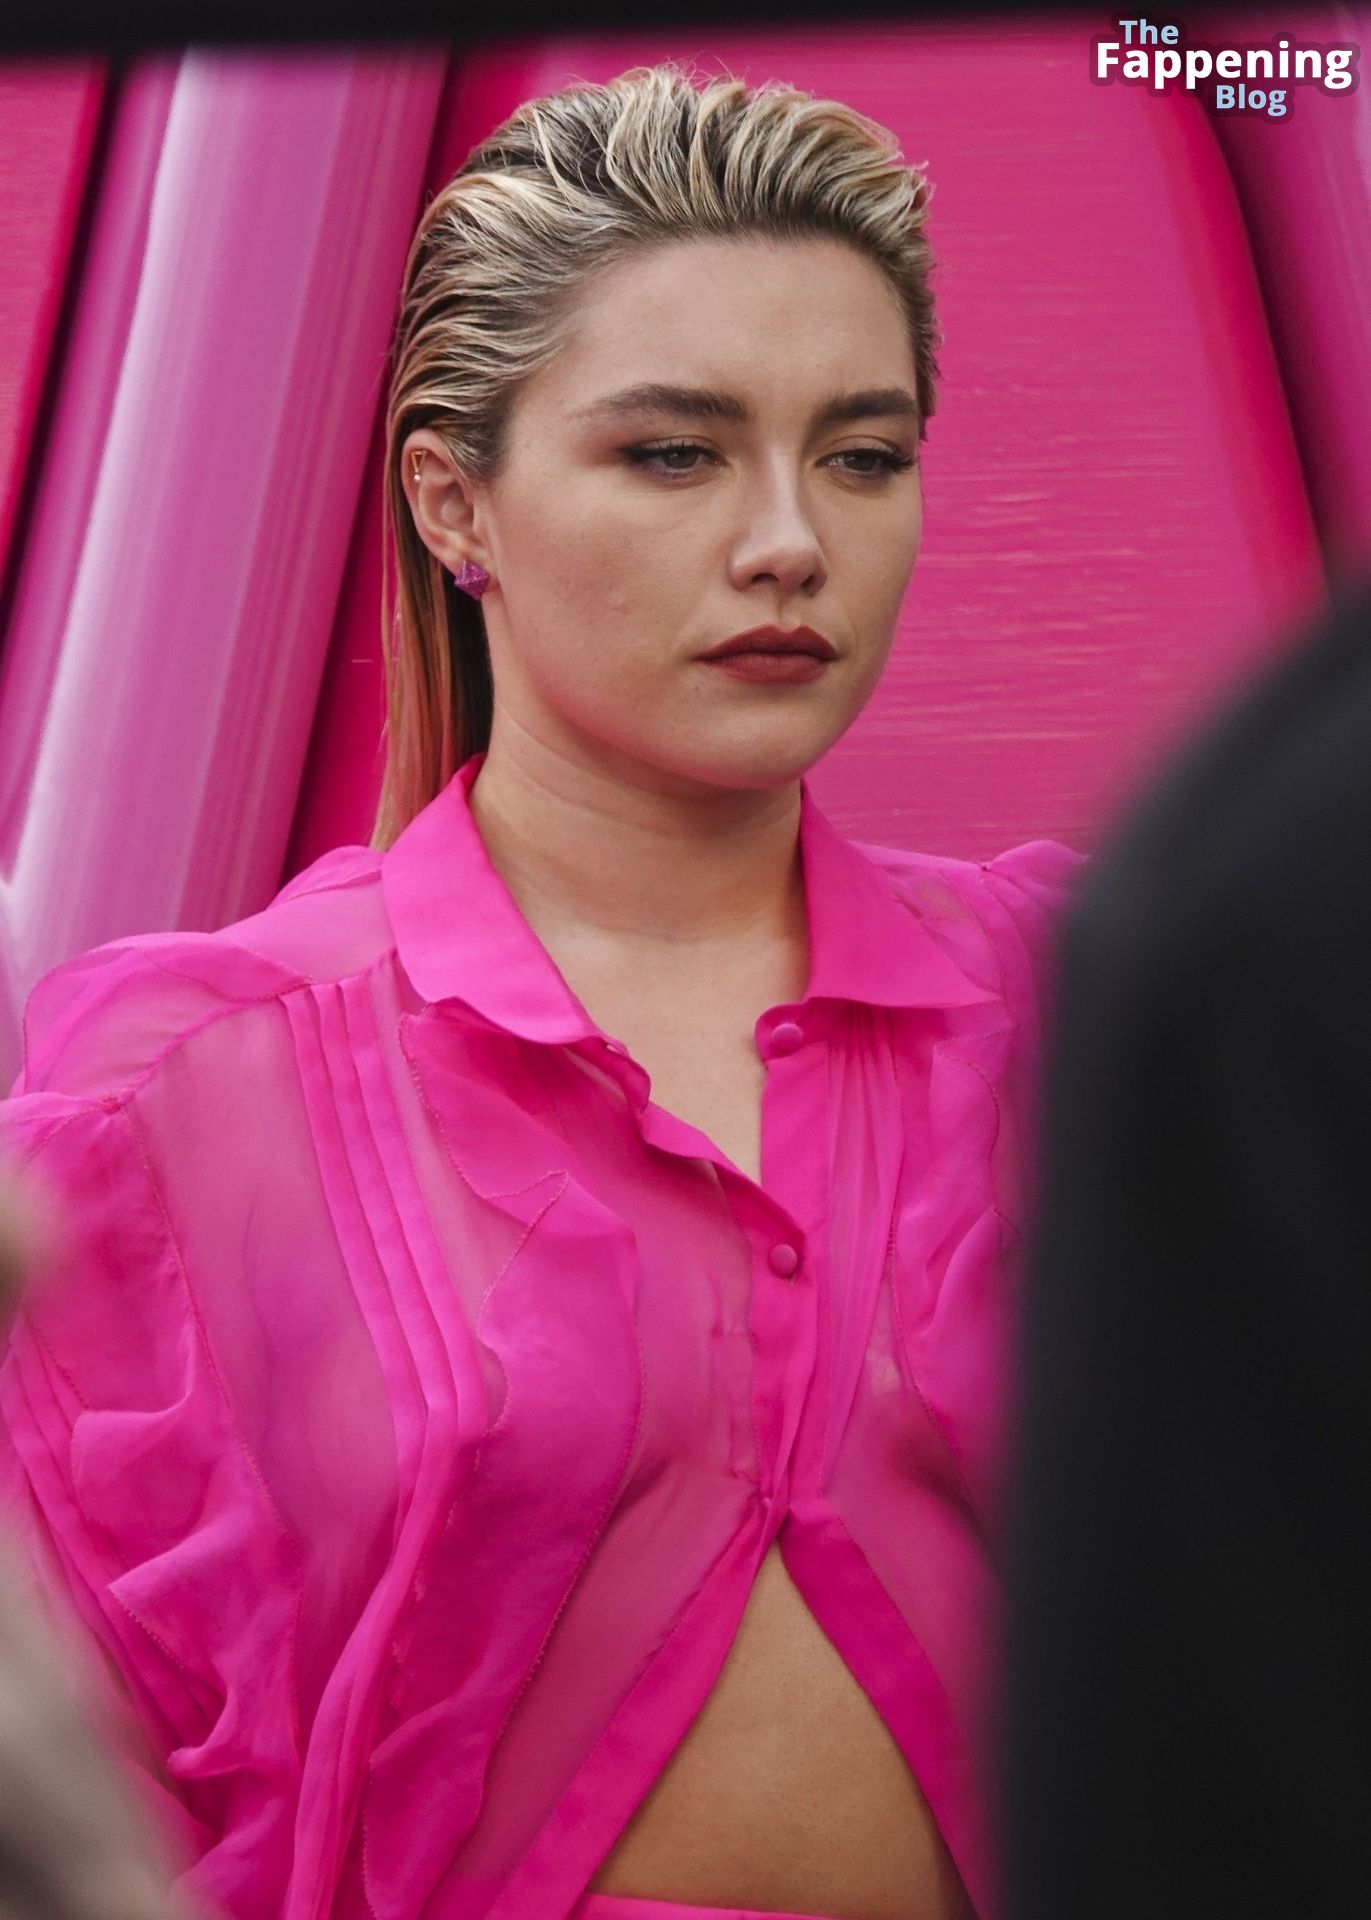 Florence-Pugh-Nude-Tits-The-Fappening-Blog-74.jpg